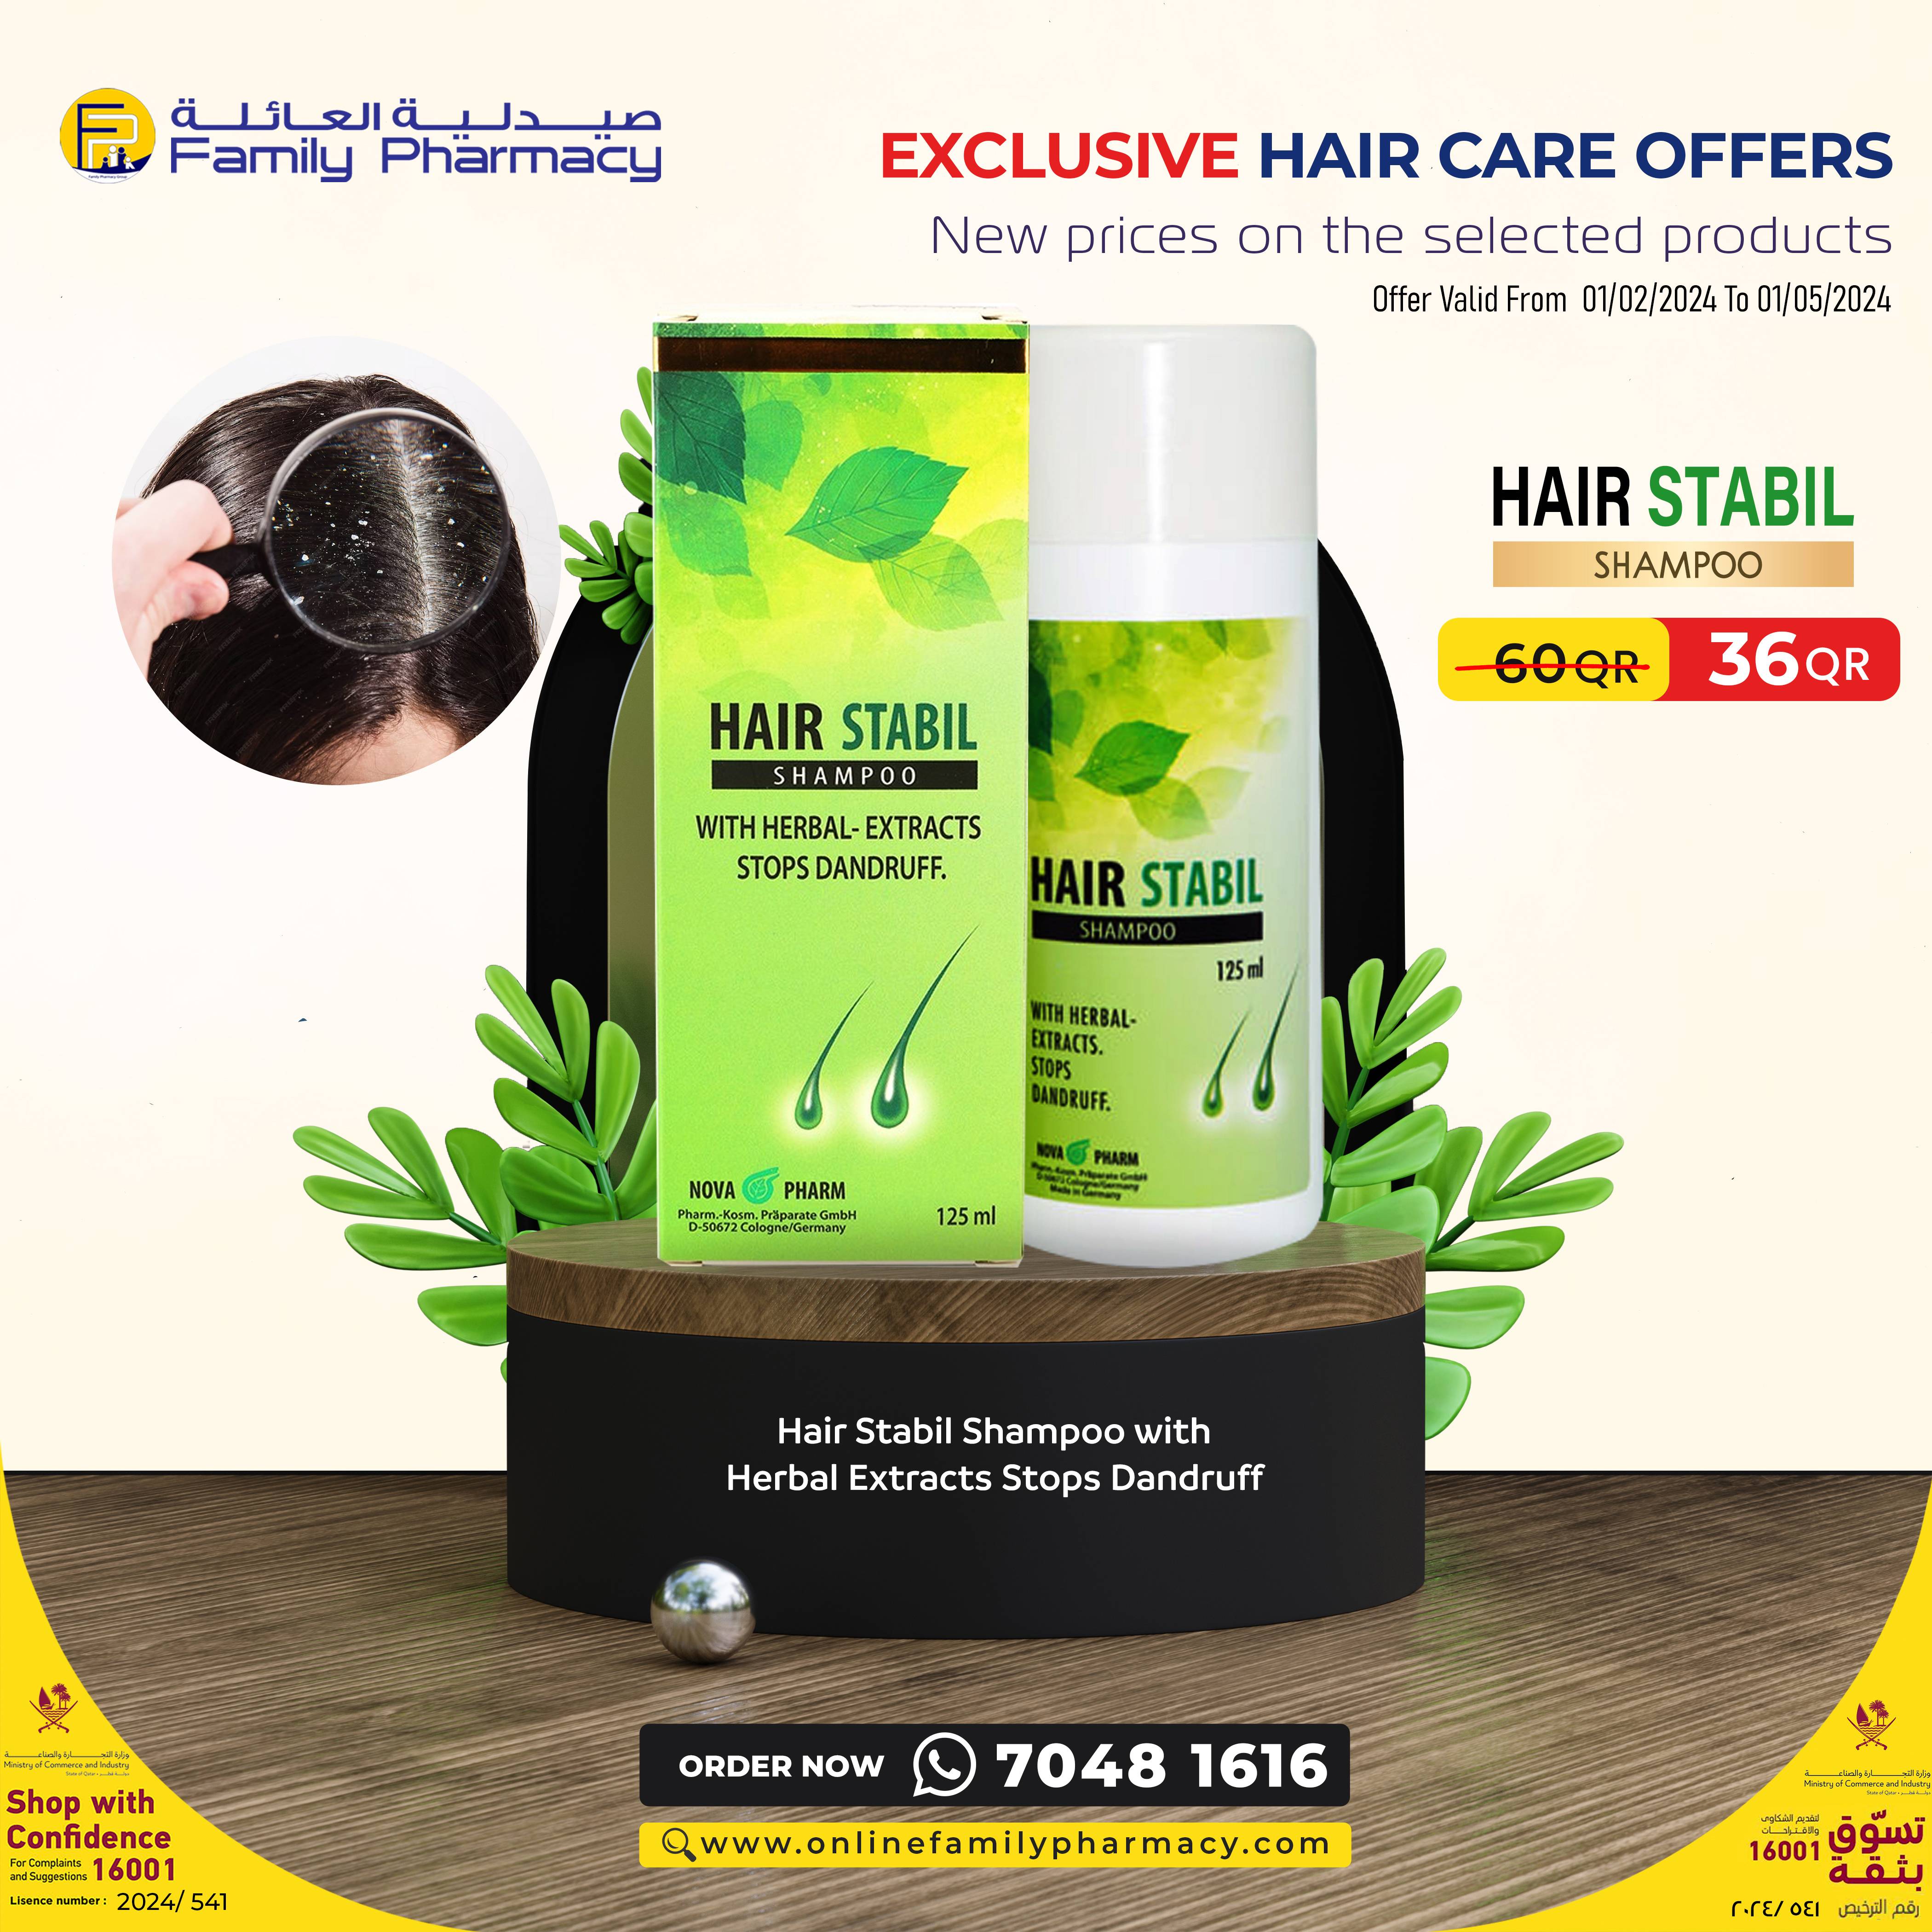 Hair Stabil Shampoo 125ml [herbal] - Nova (offer) product available at family pharmacy online buy now at qatar doha